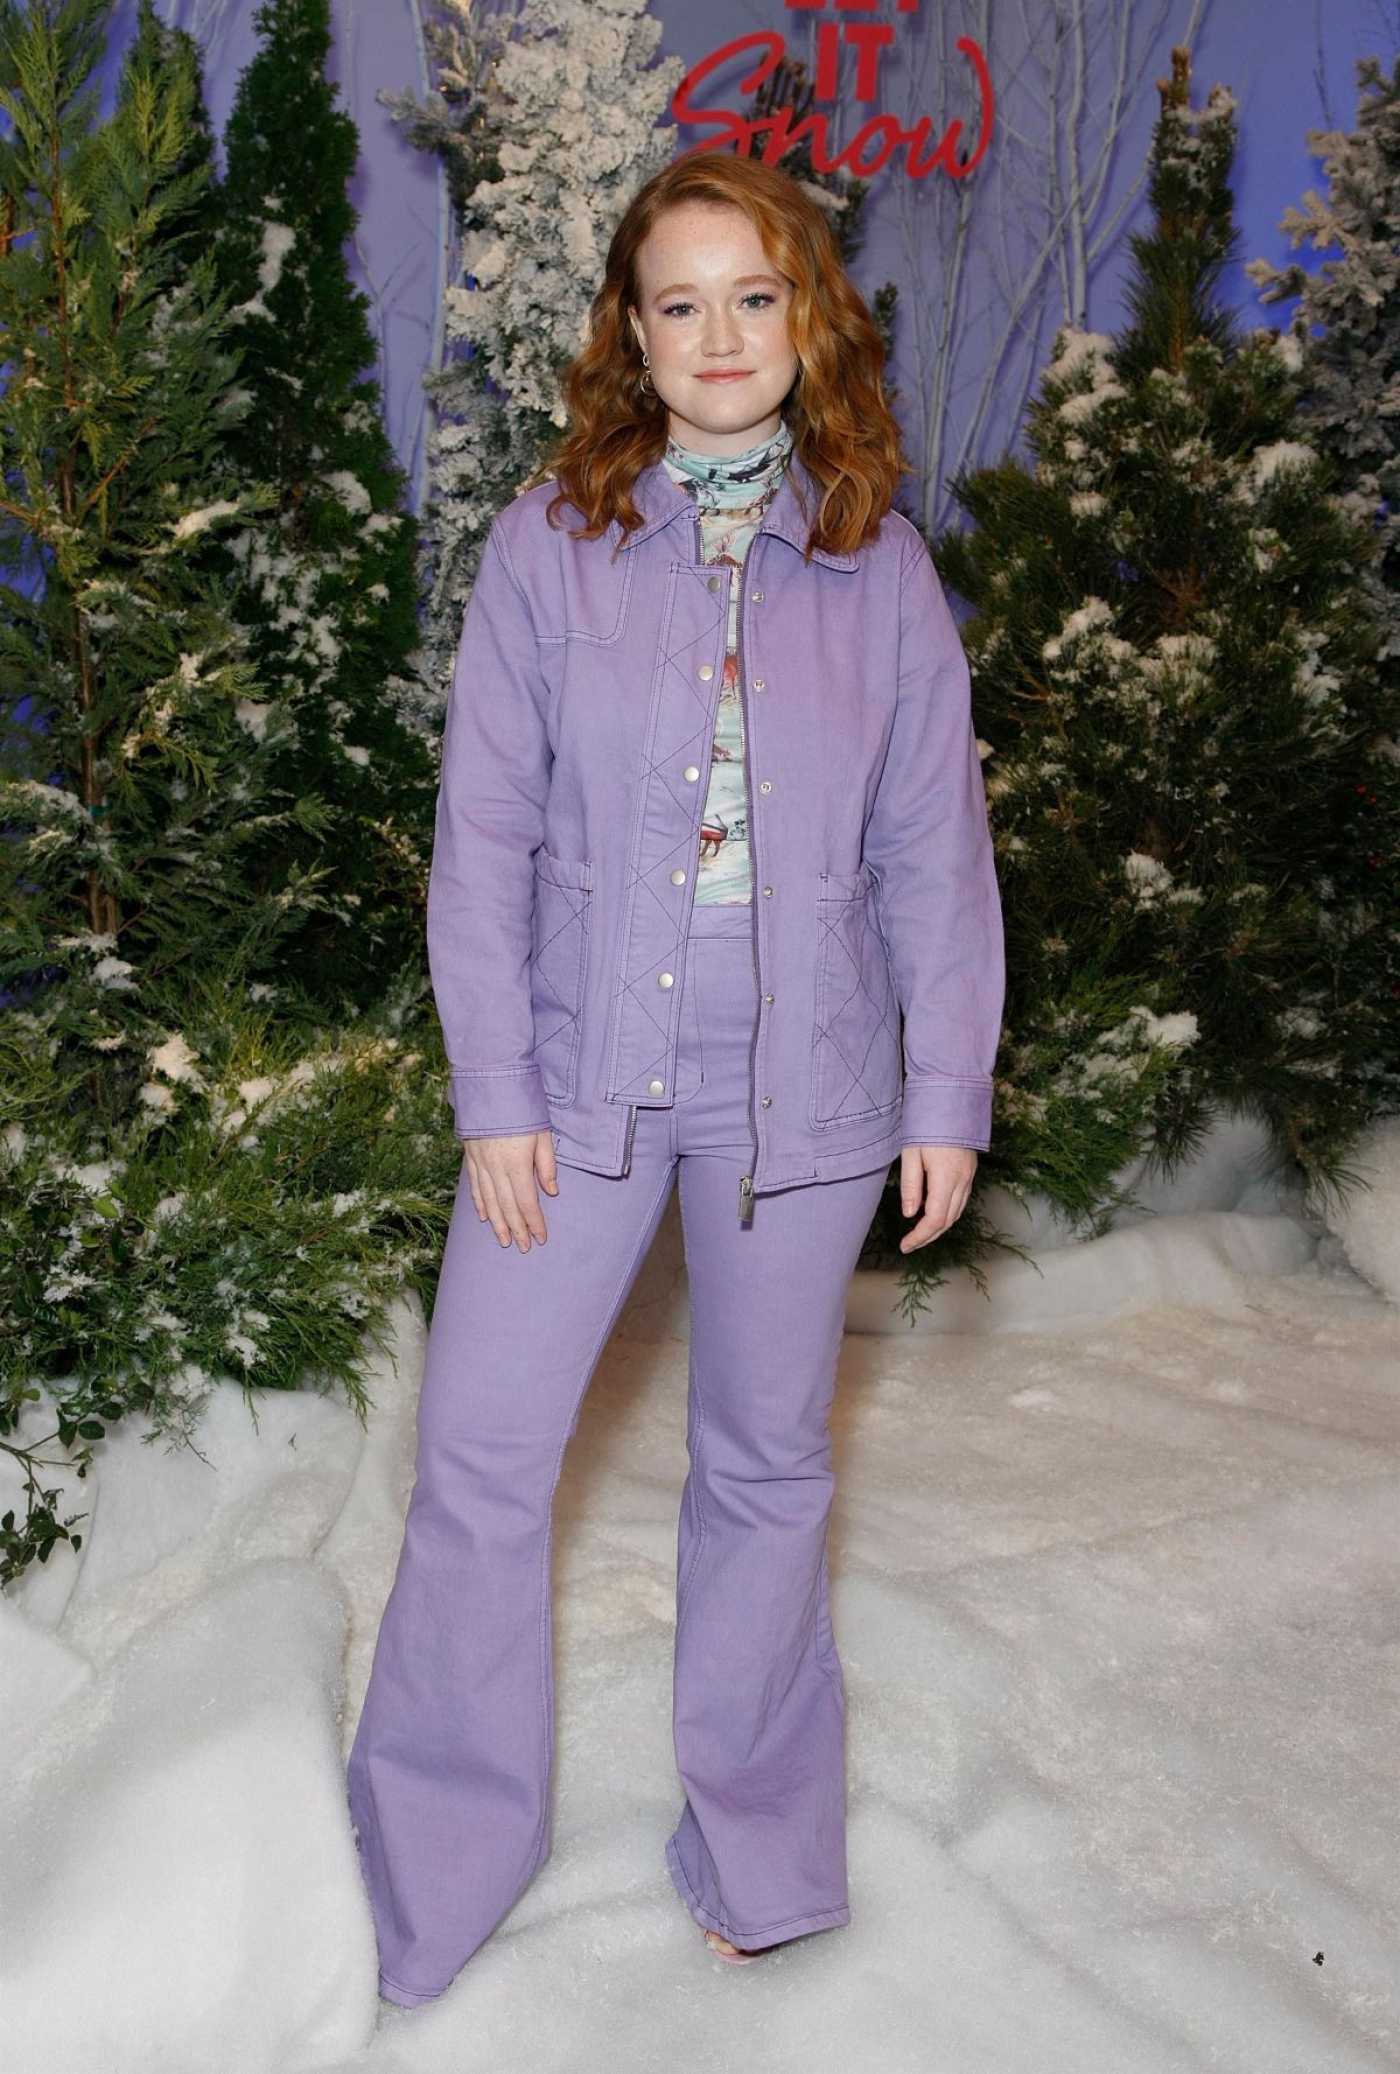 Liv Hewson Attends Netflix's Let It Snow Photocall at the Beverly Wilshire Four Seasons Hotel in Beverly Hills 11/01/2019